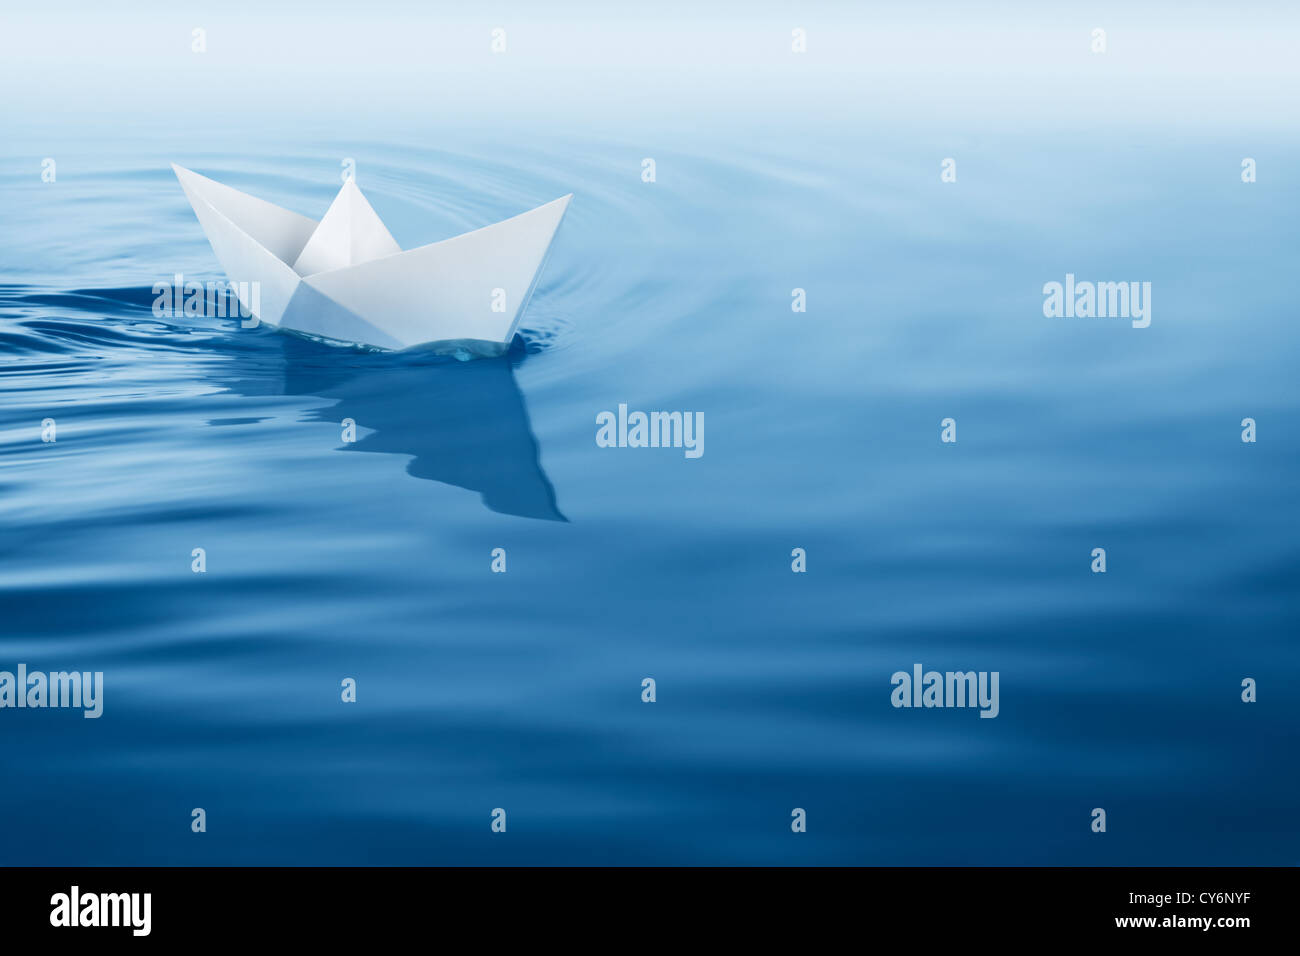 paper boat sailing on blue water surface Stock Photo